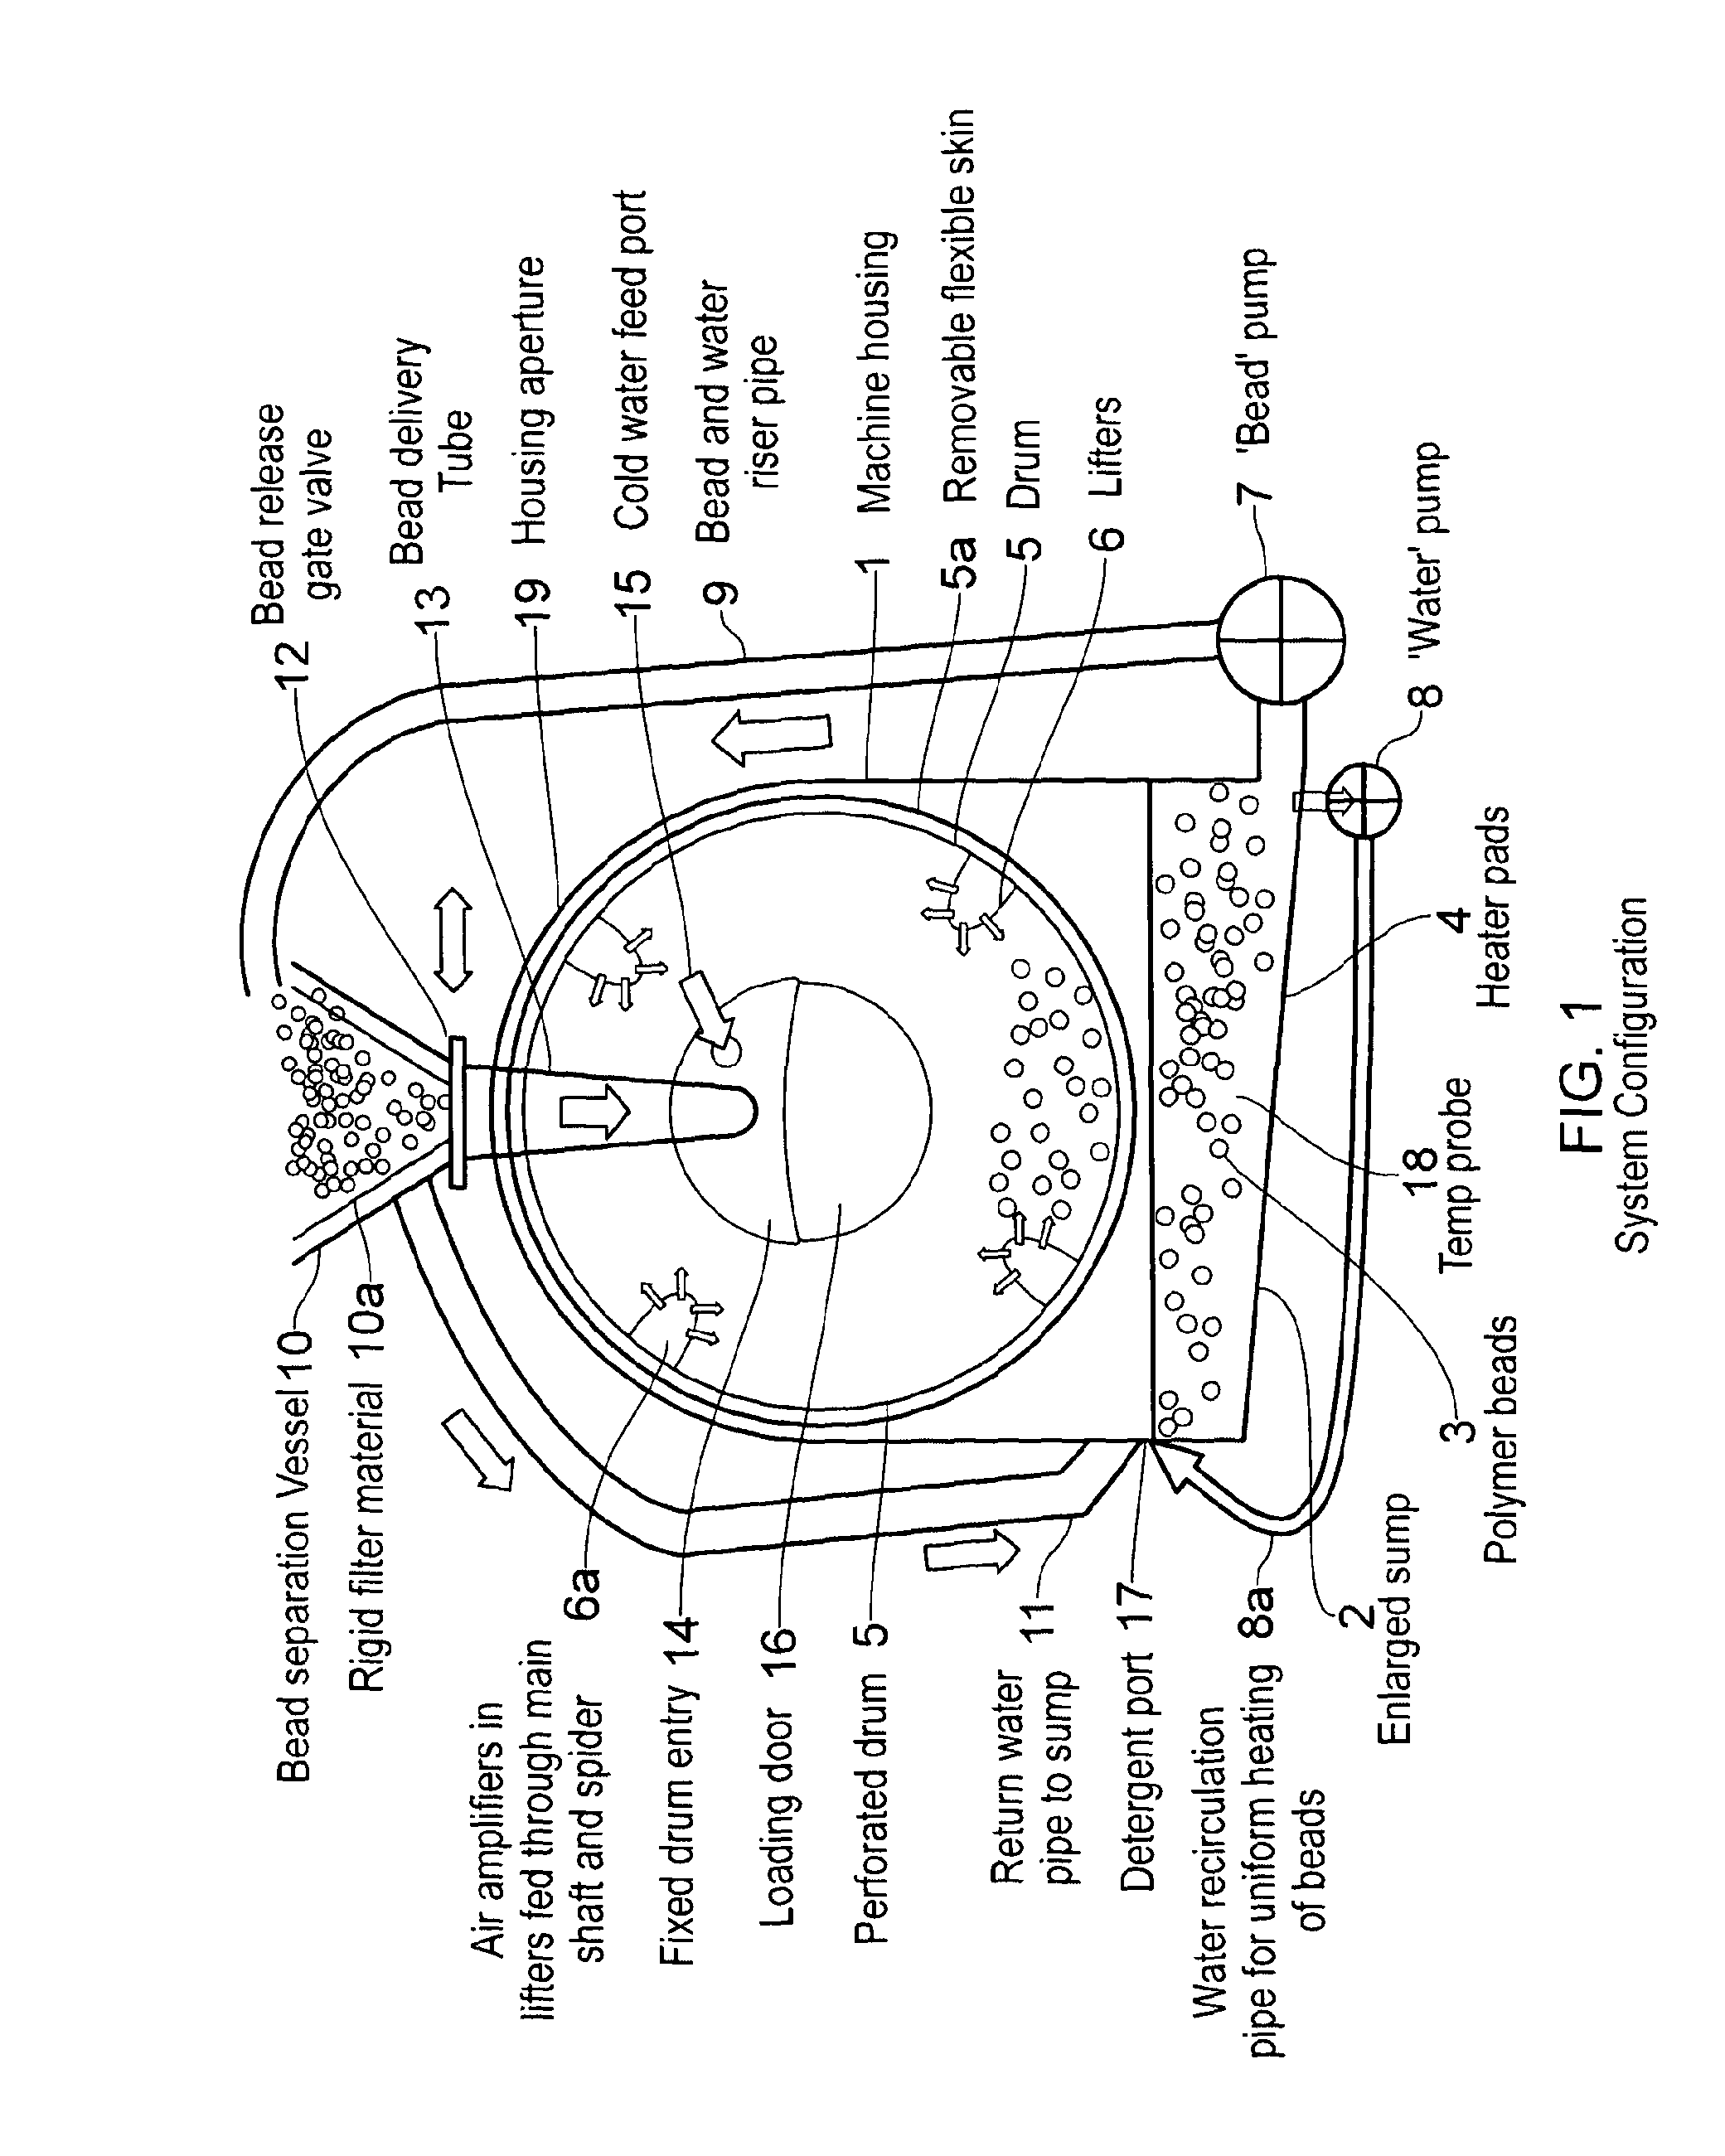 Cleaning apparatus for soiled substrates having a removable cage sealing means